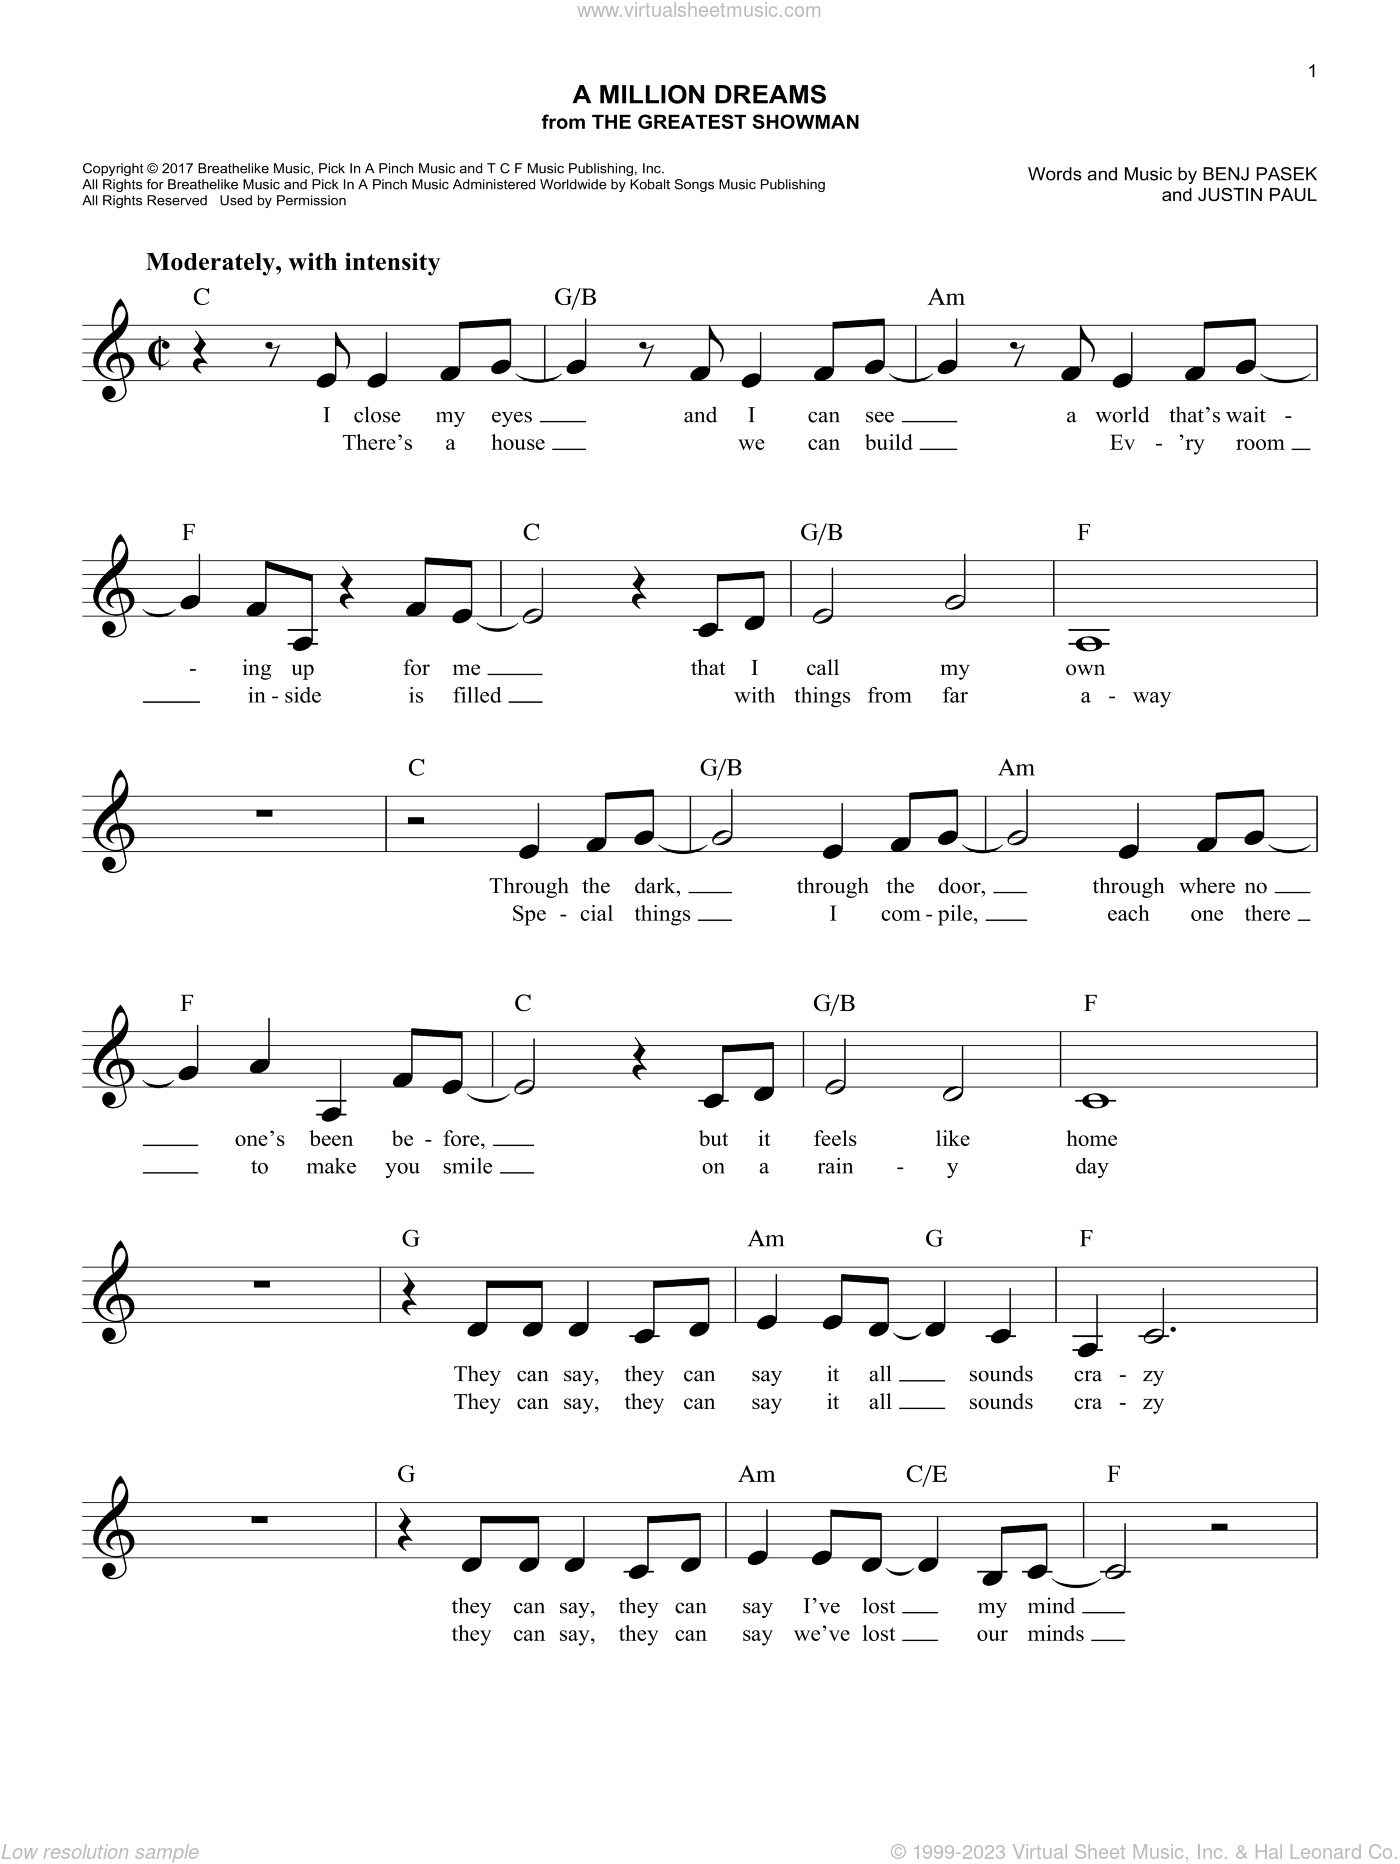 The Greatest Showman Million Dreams Chords, PDF, Song Structure